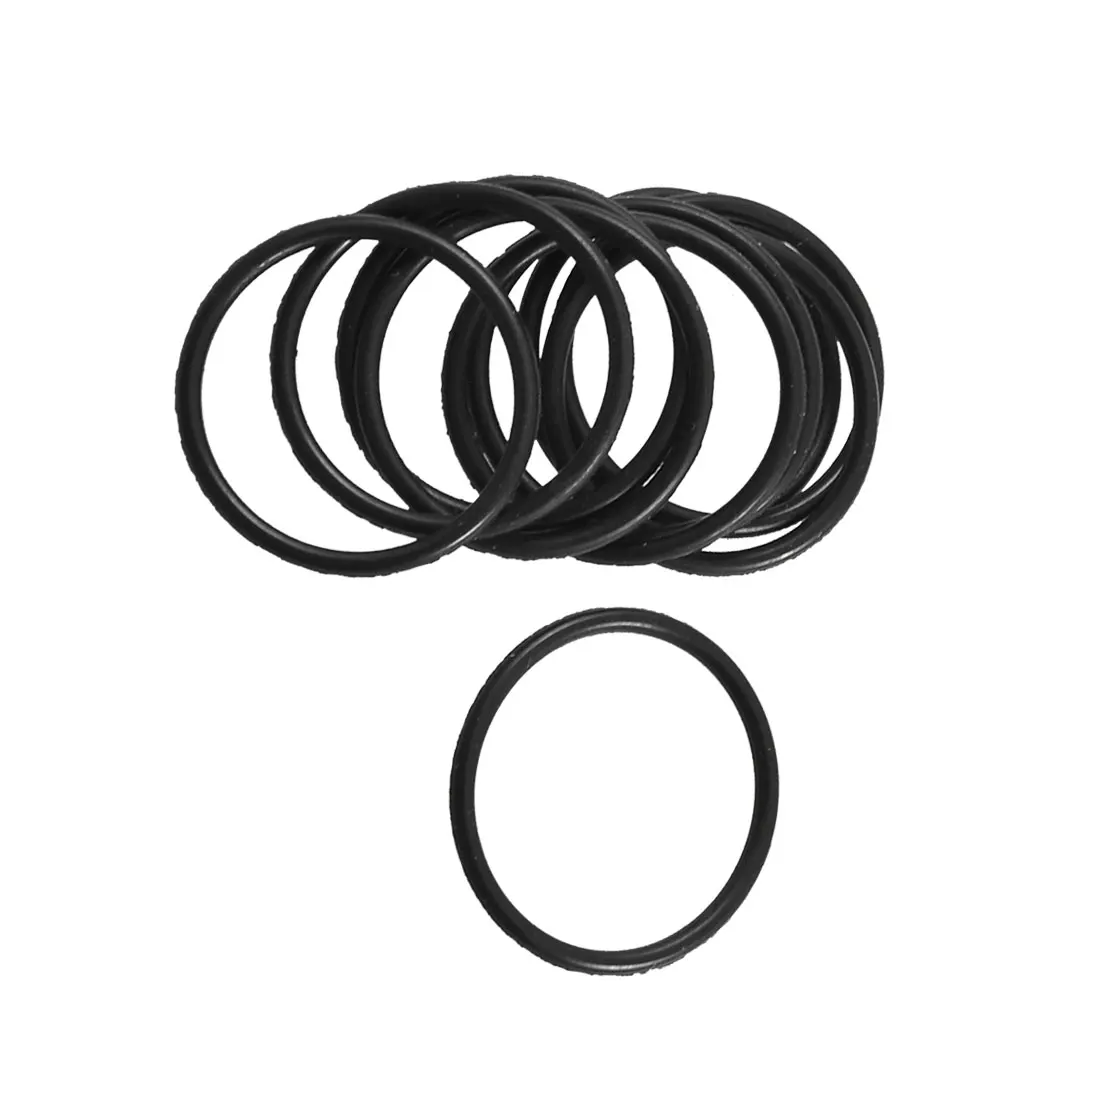 

Uxcell 10 Pcs 1.5mm Black Rubber Oil Filter O Ring Seal Gaskets Id 18mm 19mm 20mm 21mm 22mm 25mm 27mm 28mm